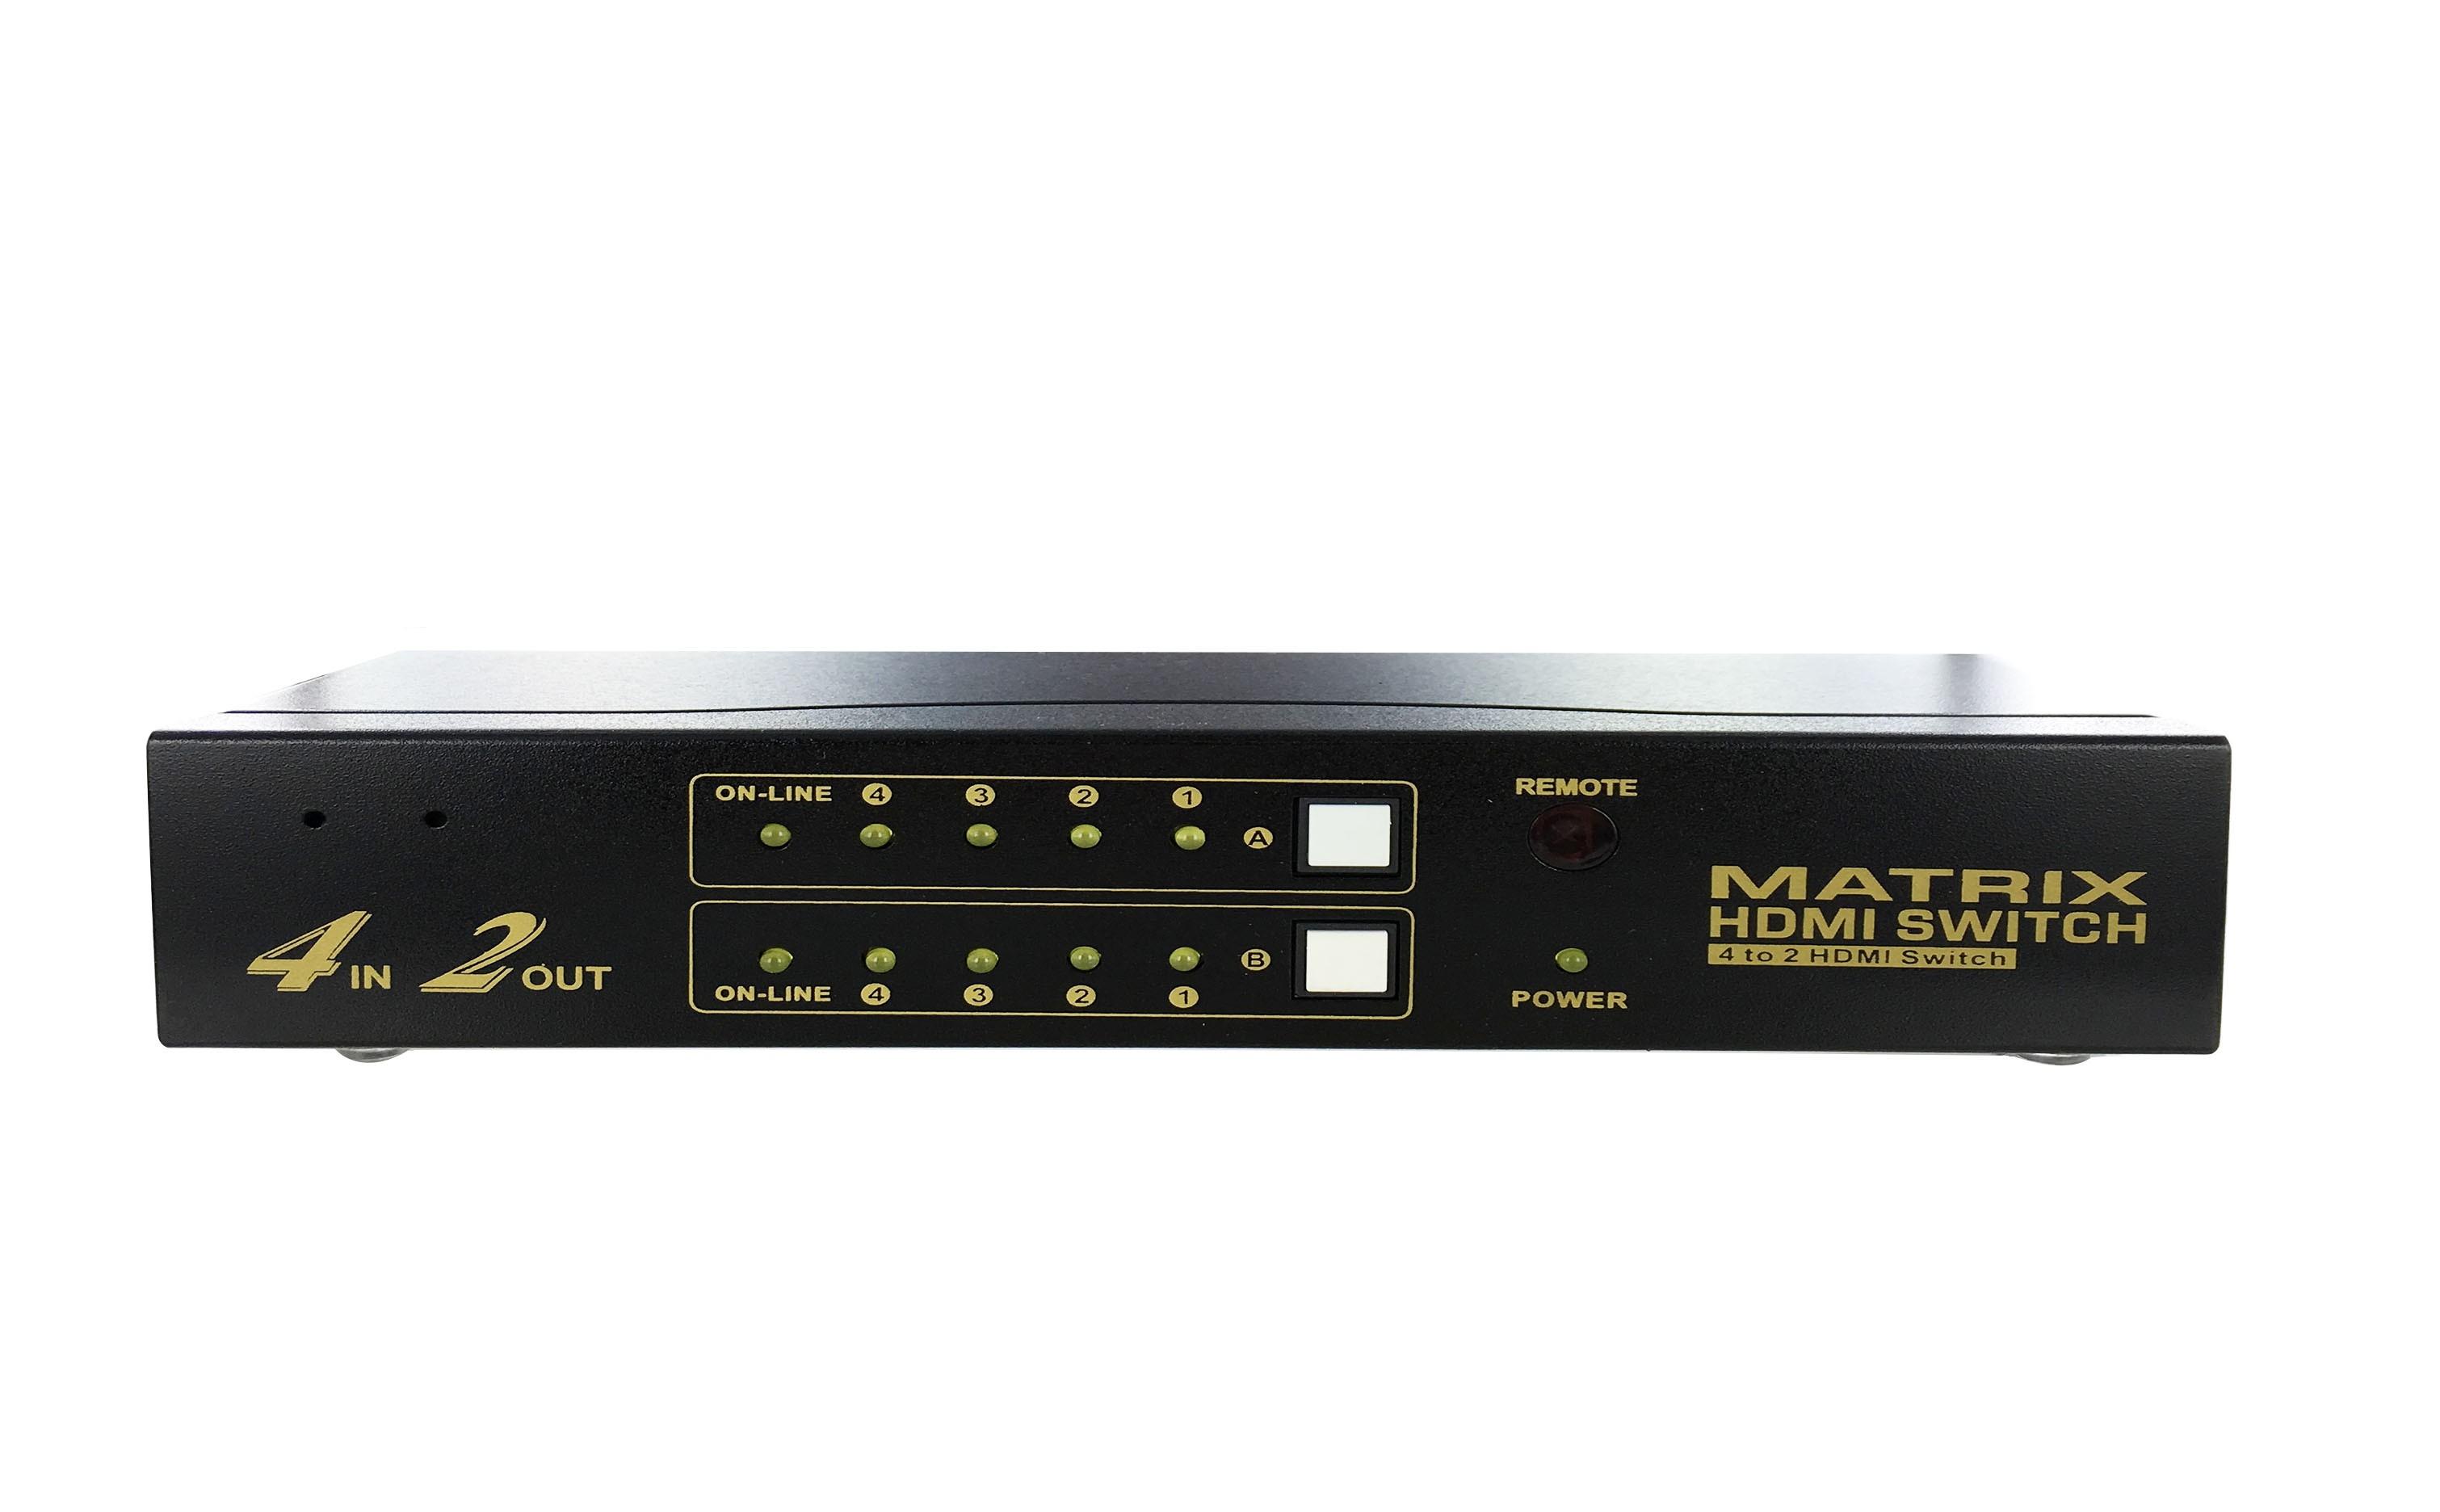 Matrice HDMI 4x2 (4 in-2 out) 1080p - RS232 - HDCP - télécommande IR